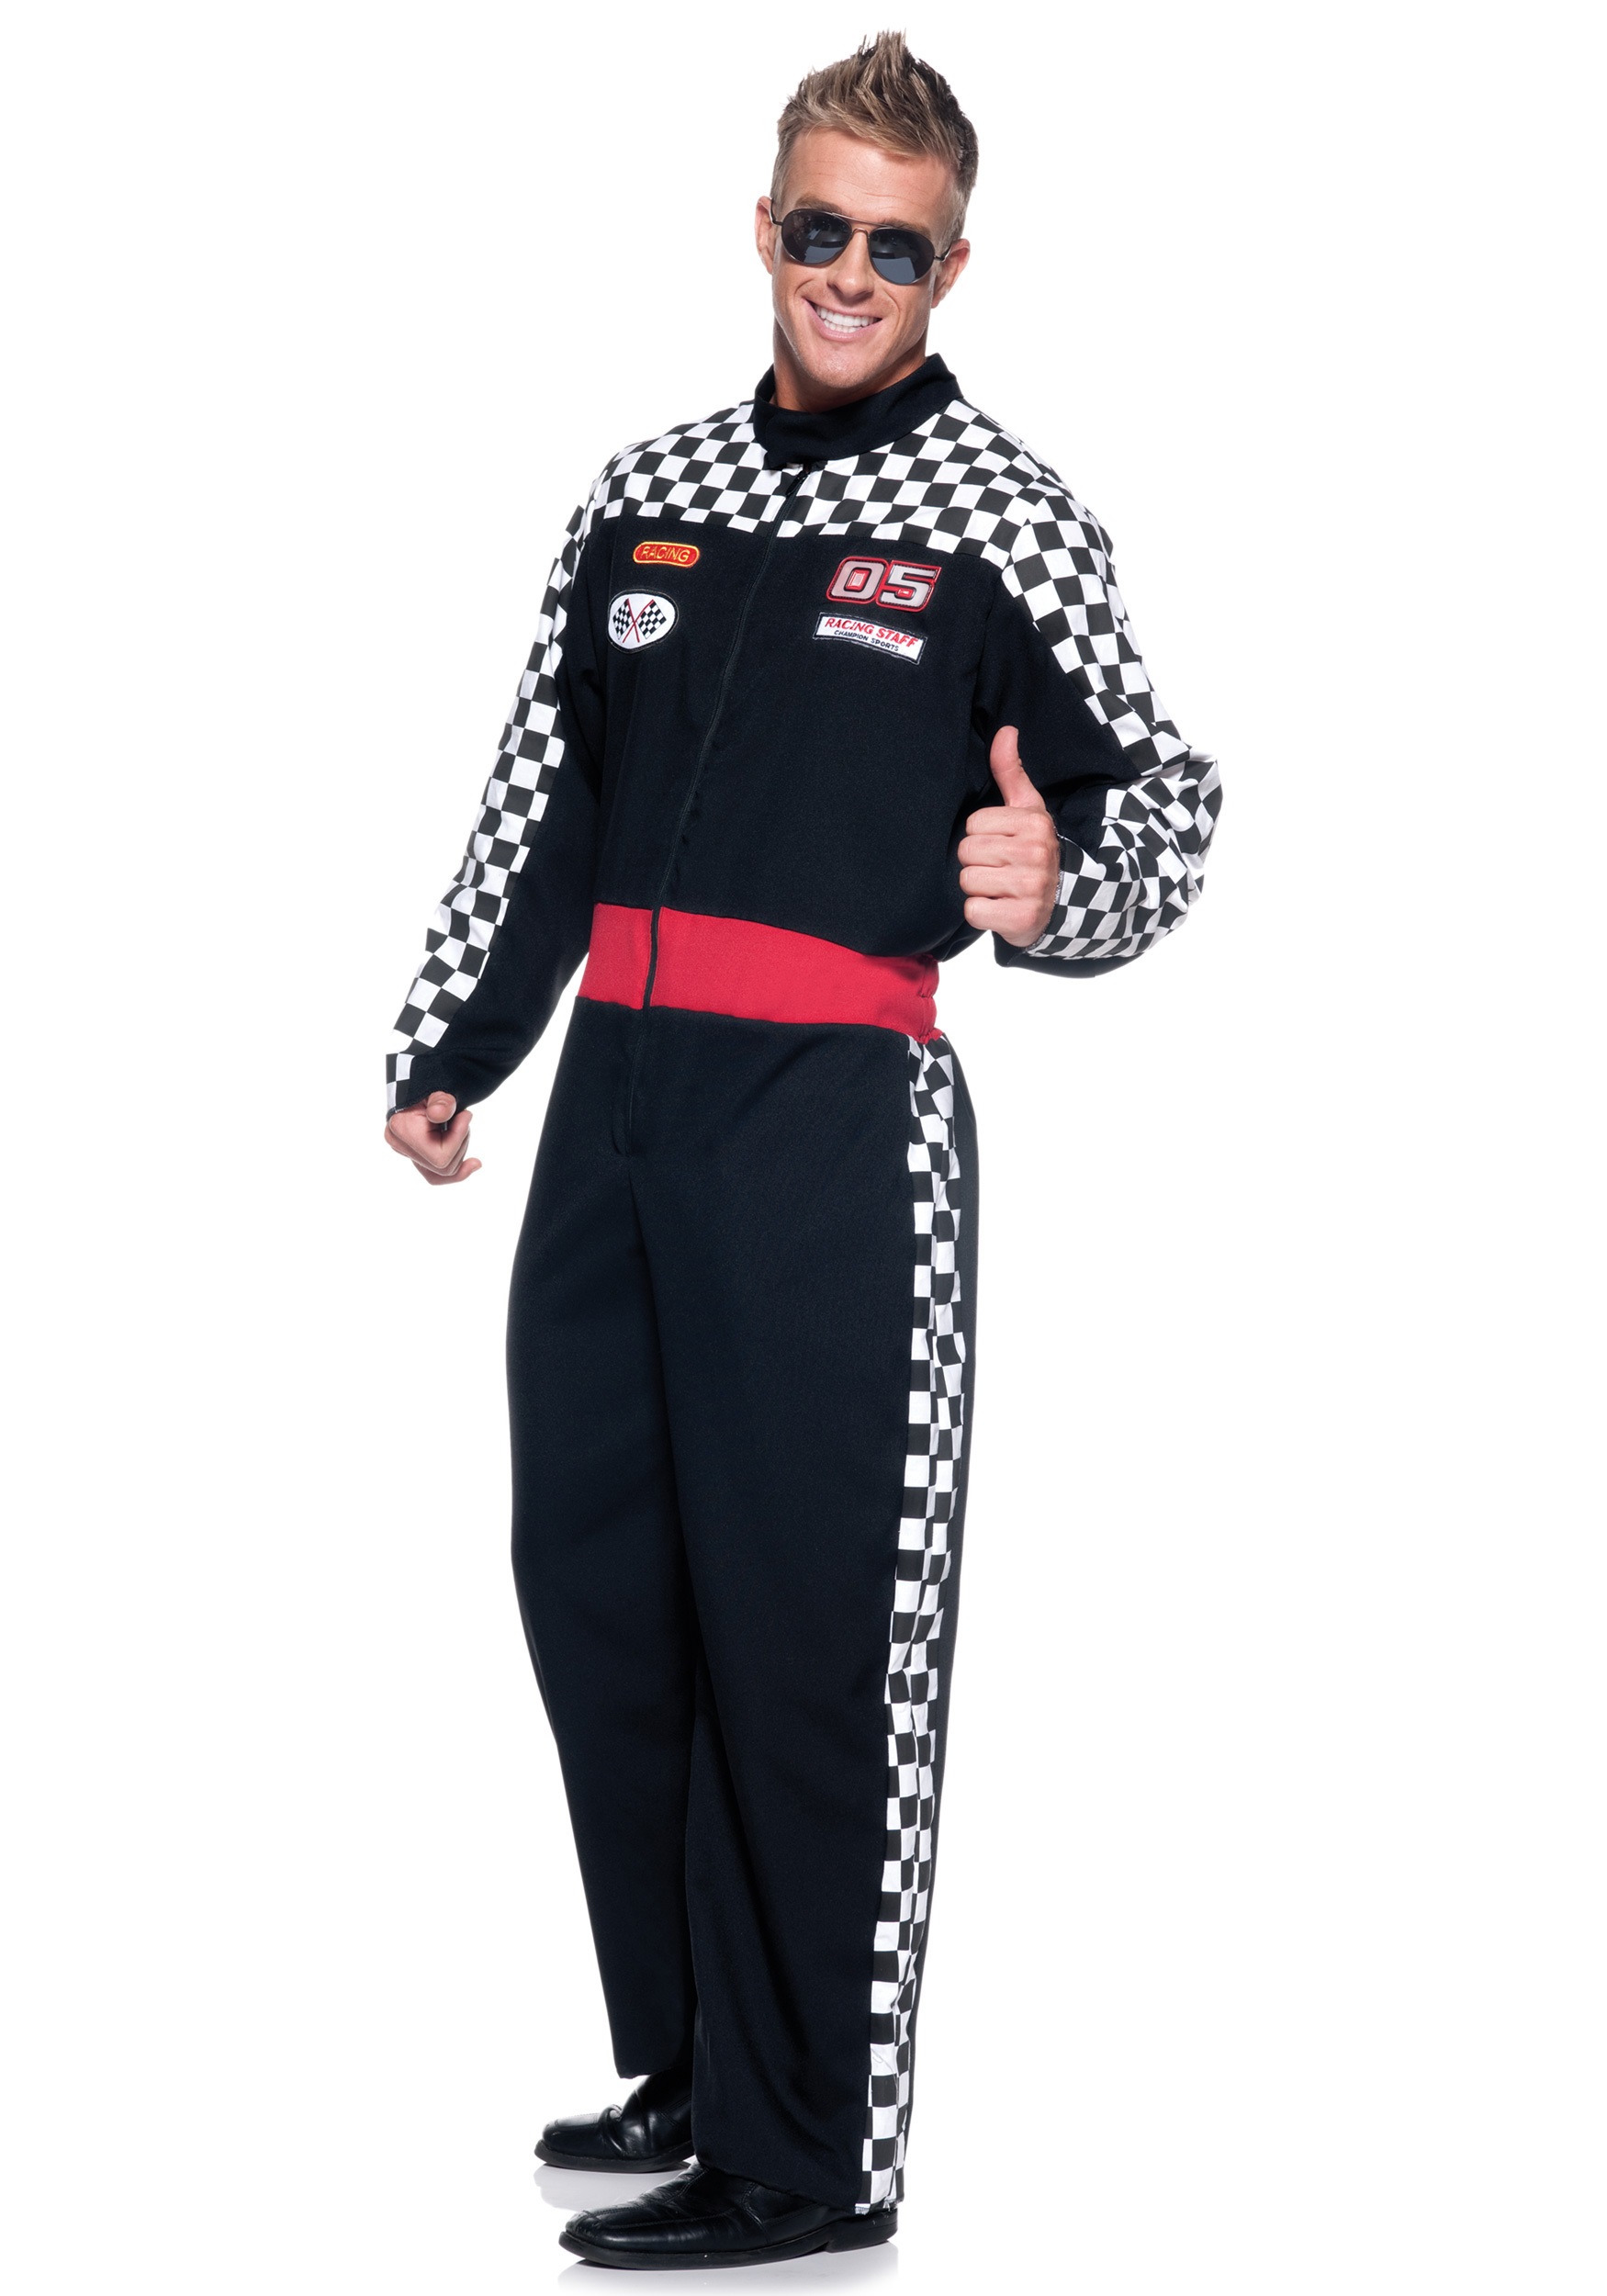 Studly Race Car Driver Costume for Men